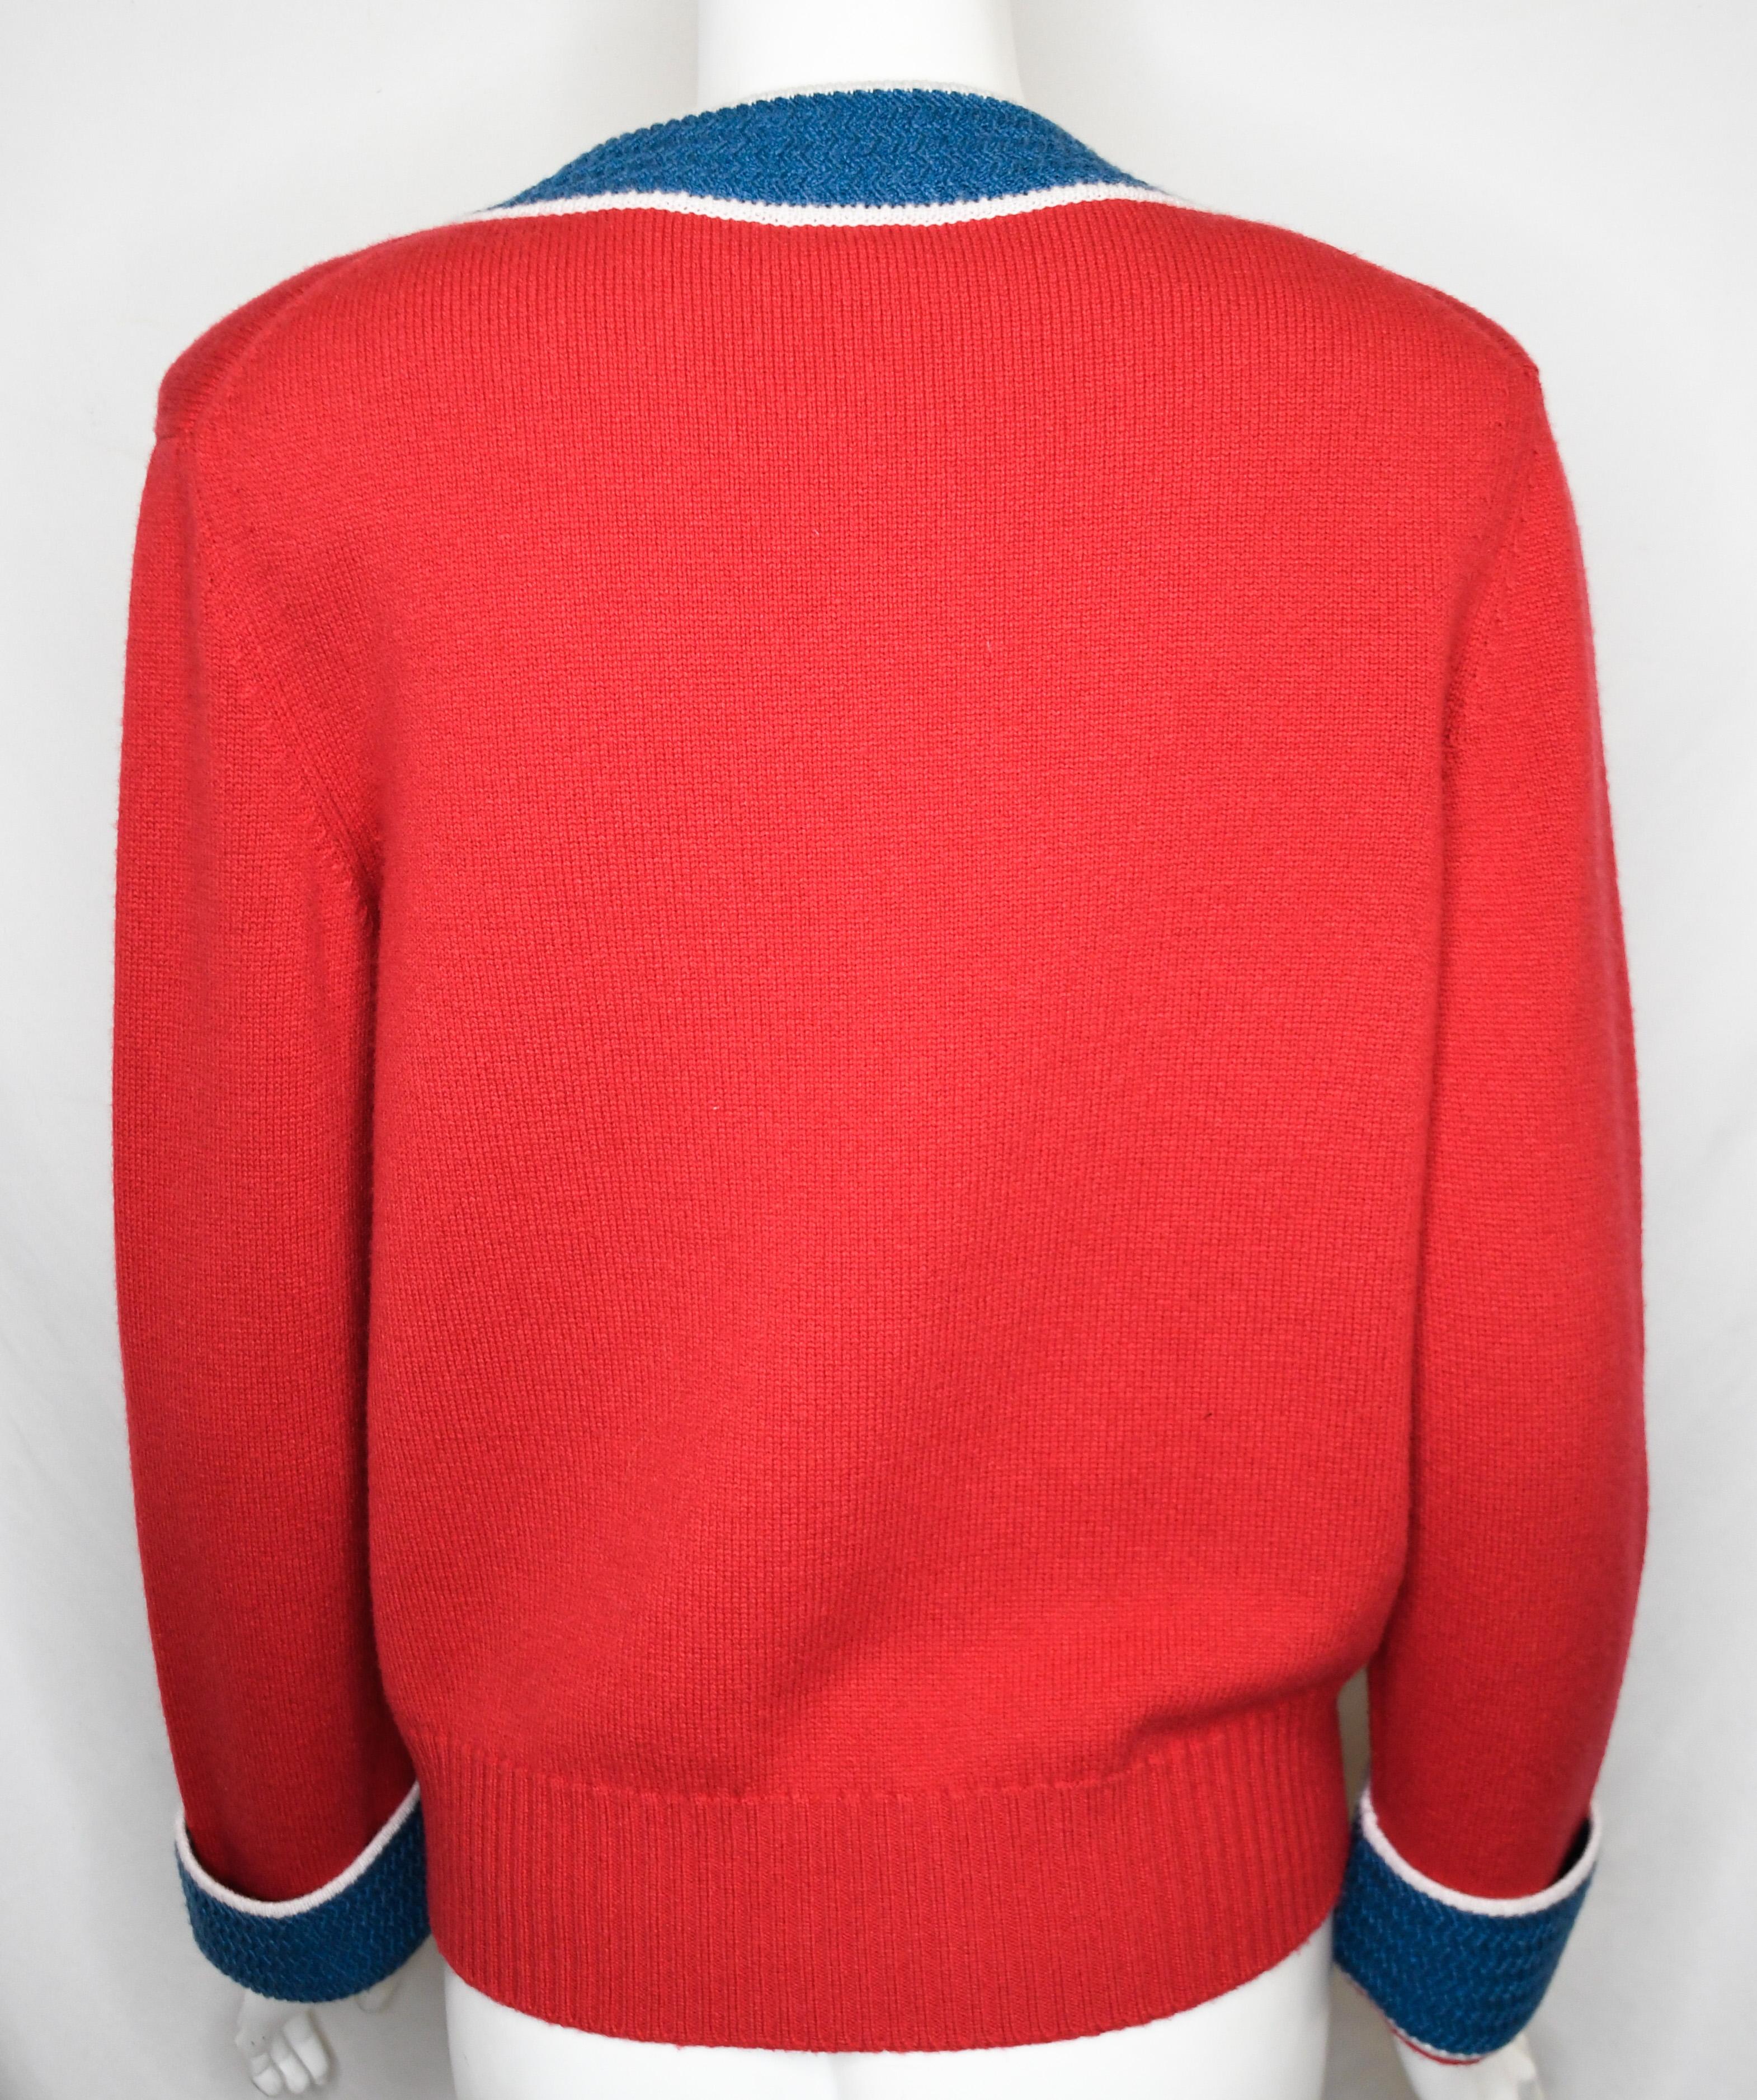 red and blue cardigan